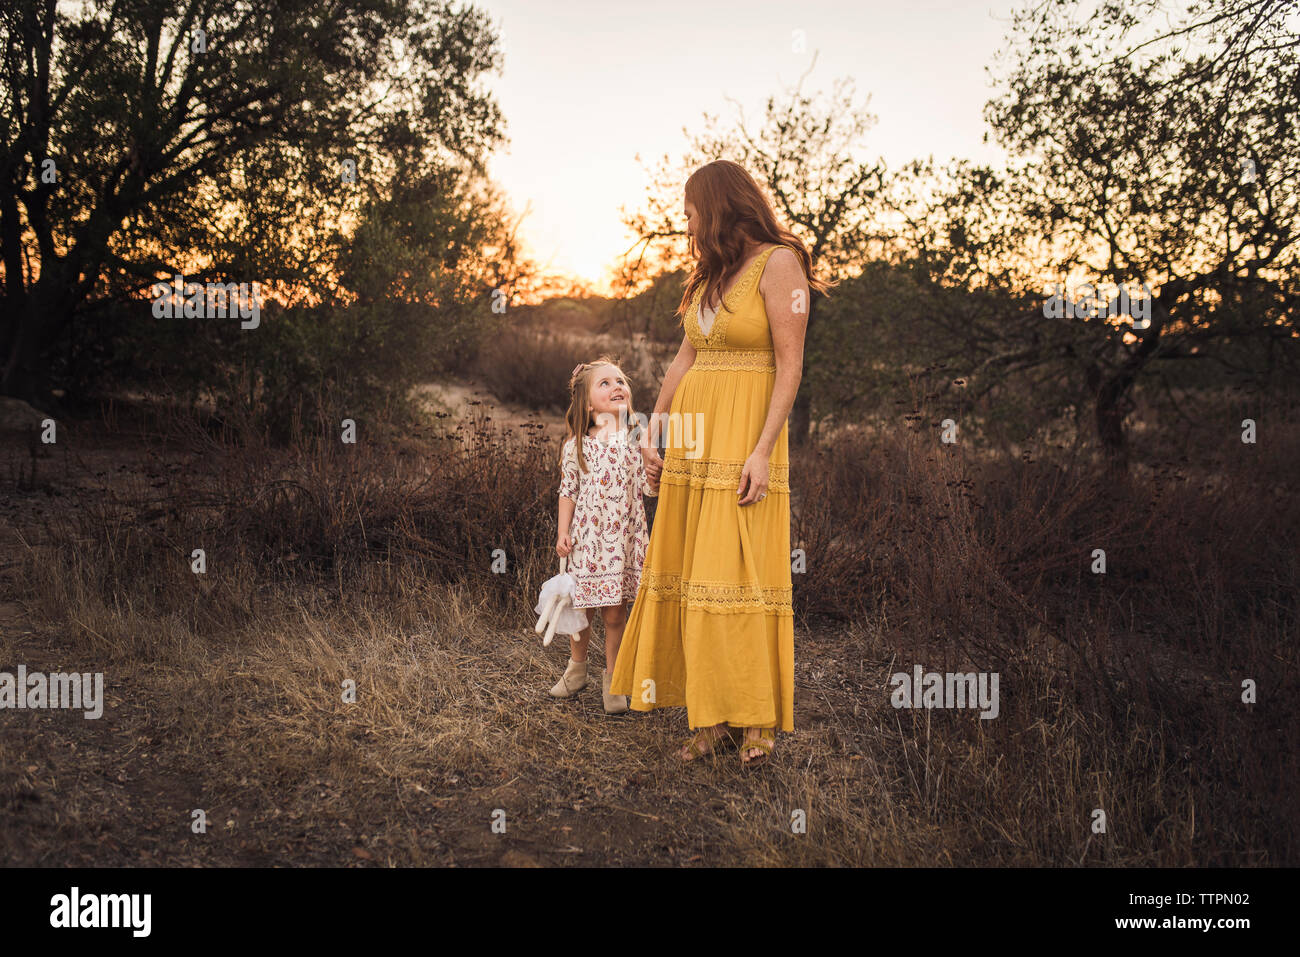 Young girl holding mothers hand while looking up in California field Stock Photo